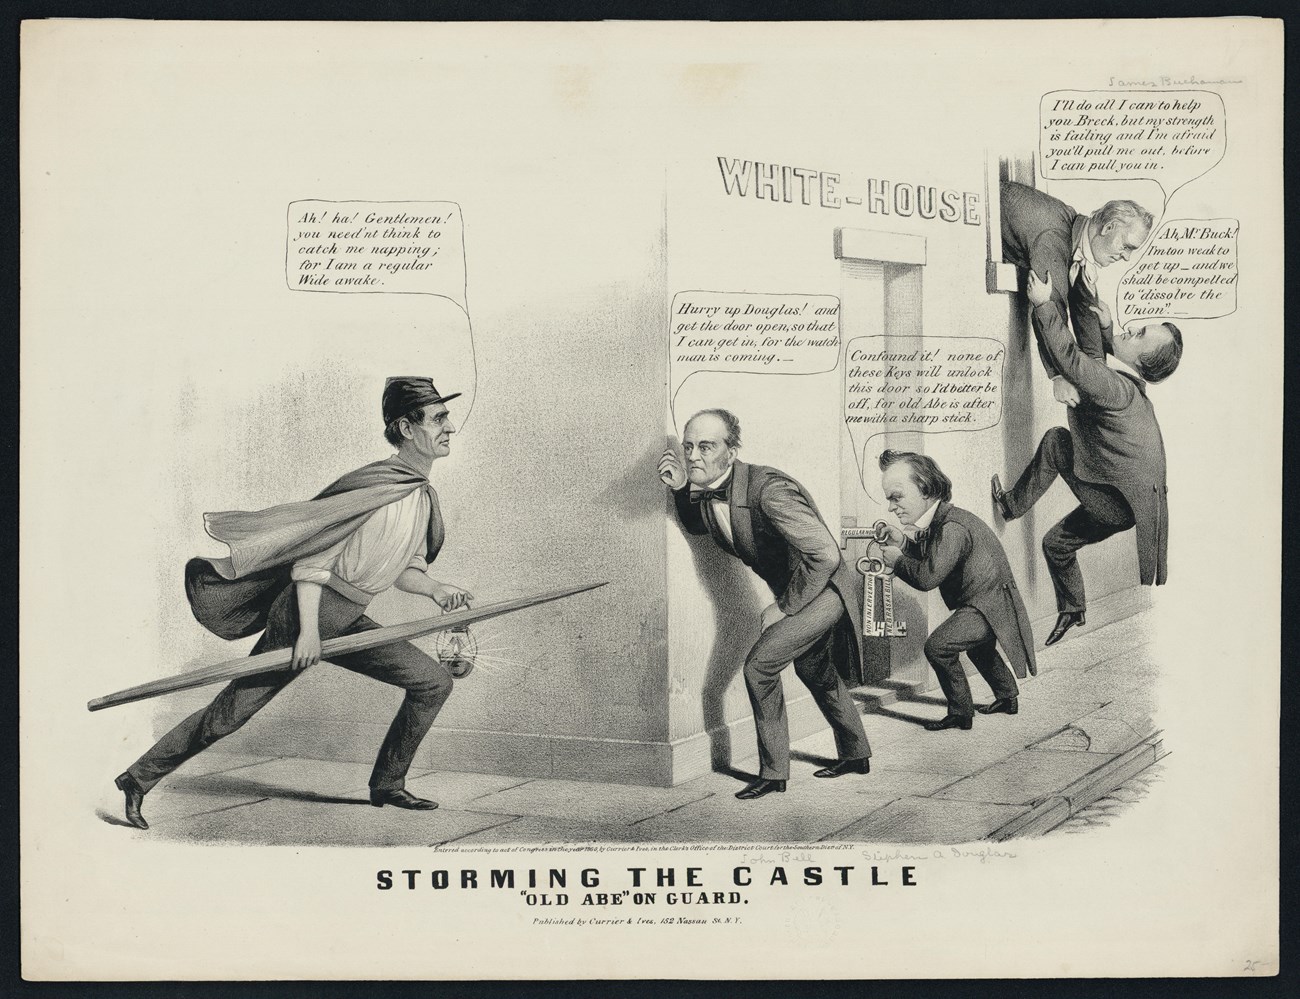 A political cartoon parodying the 1860 presidential election